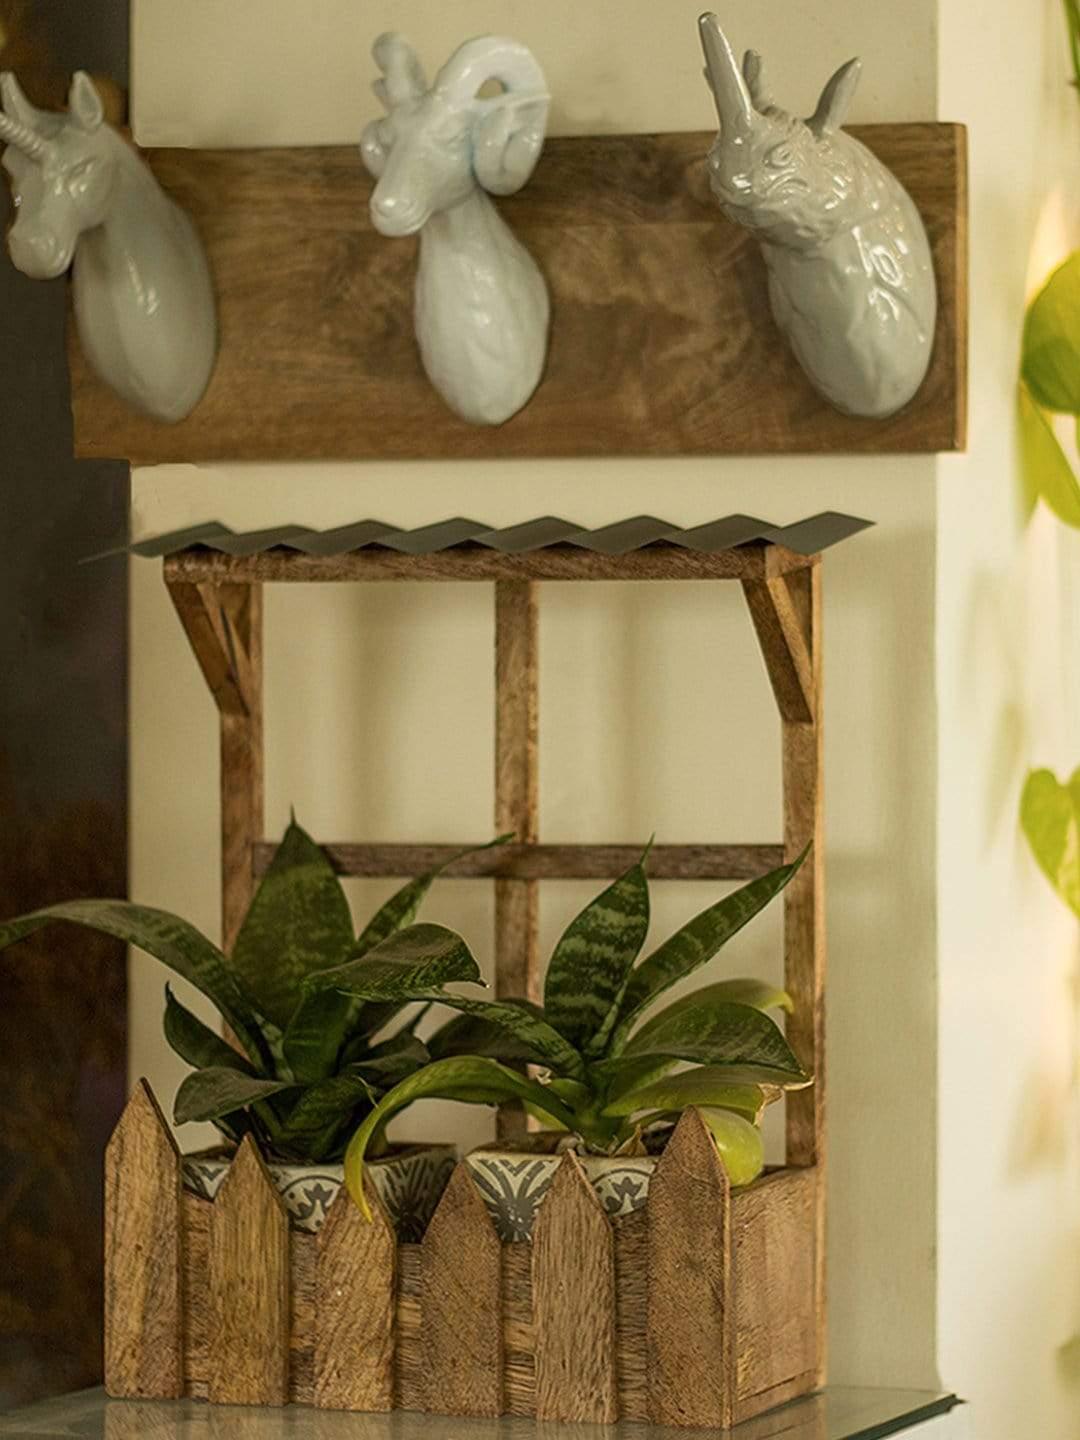 Wooden Hut Planter Holder - The Wishing Chair